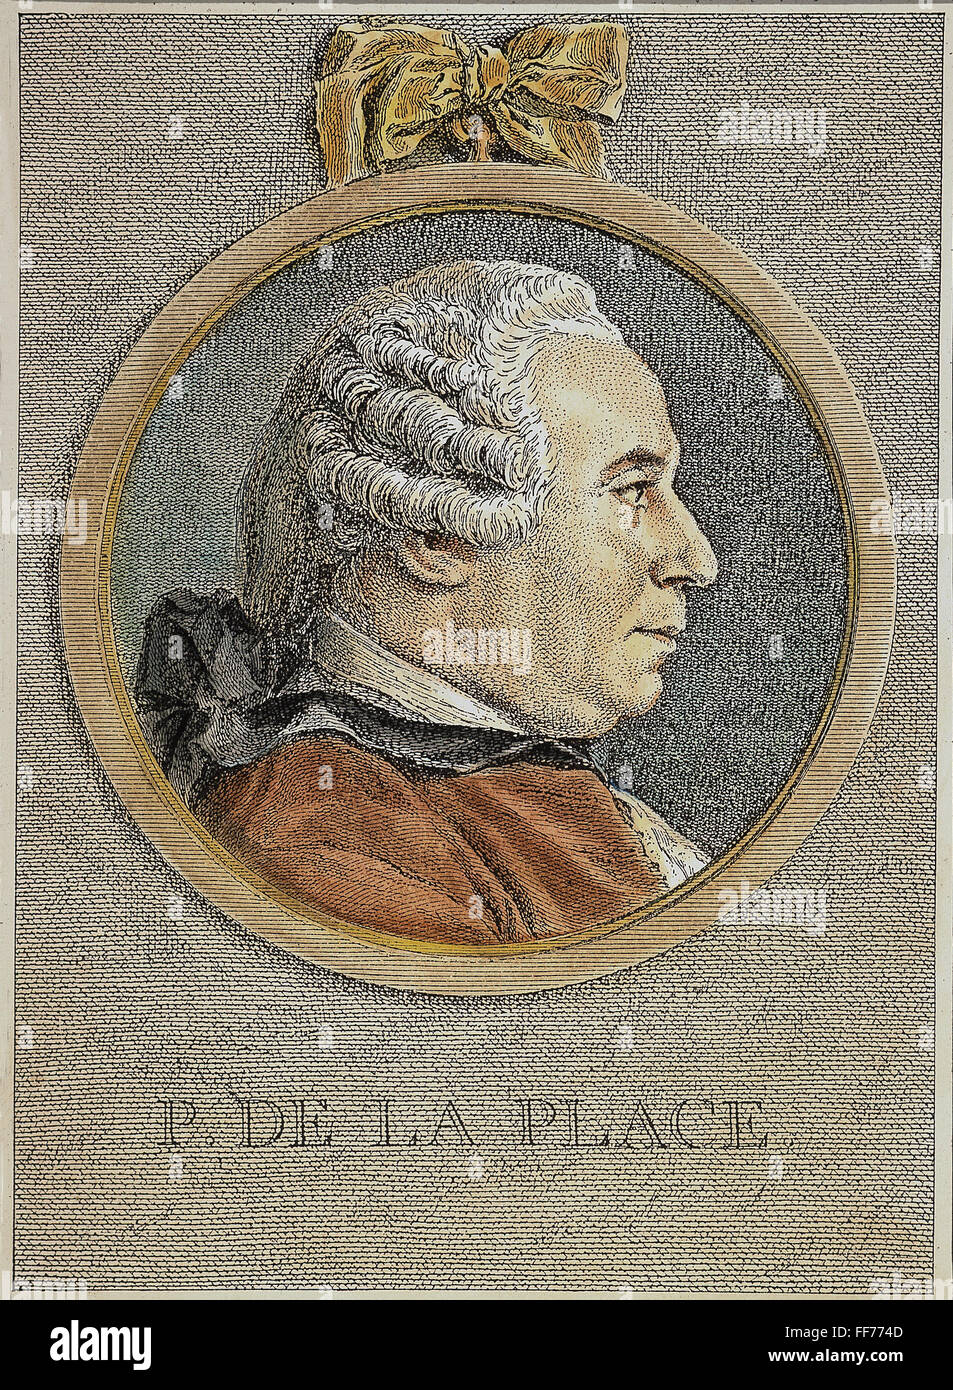 PIERRE-SIMON de LAPLACE /n(1749-1827). Contemporary French colored engraving. Stock Photo